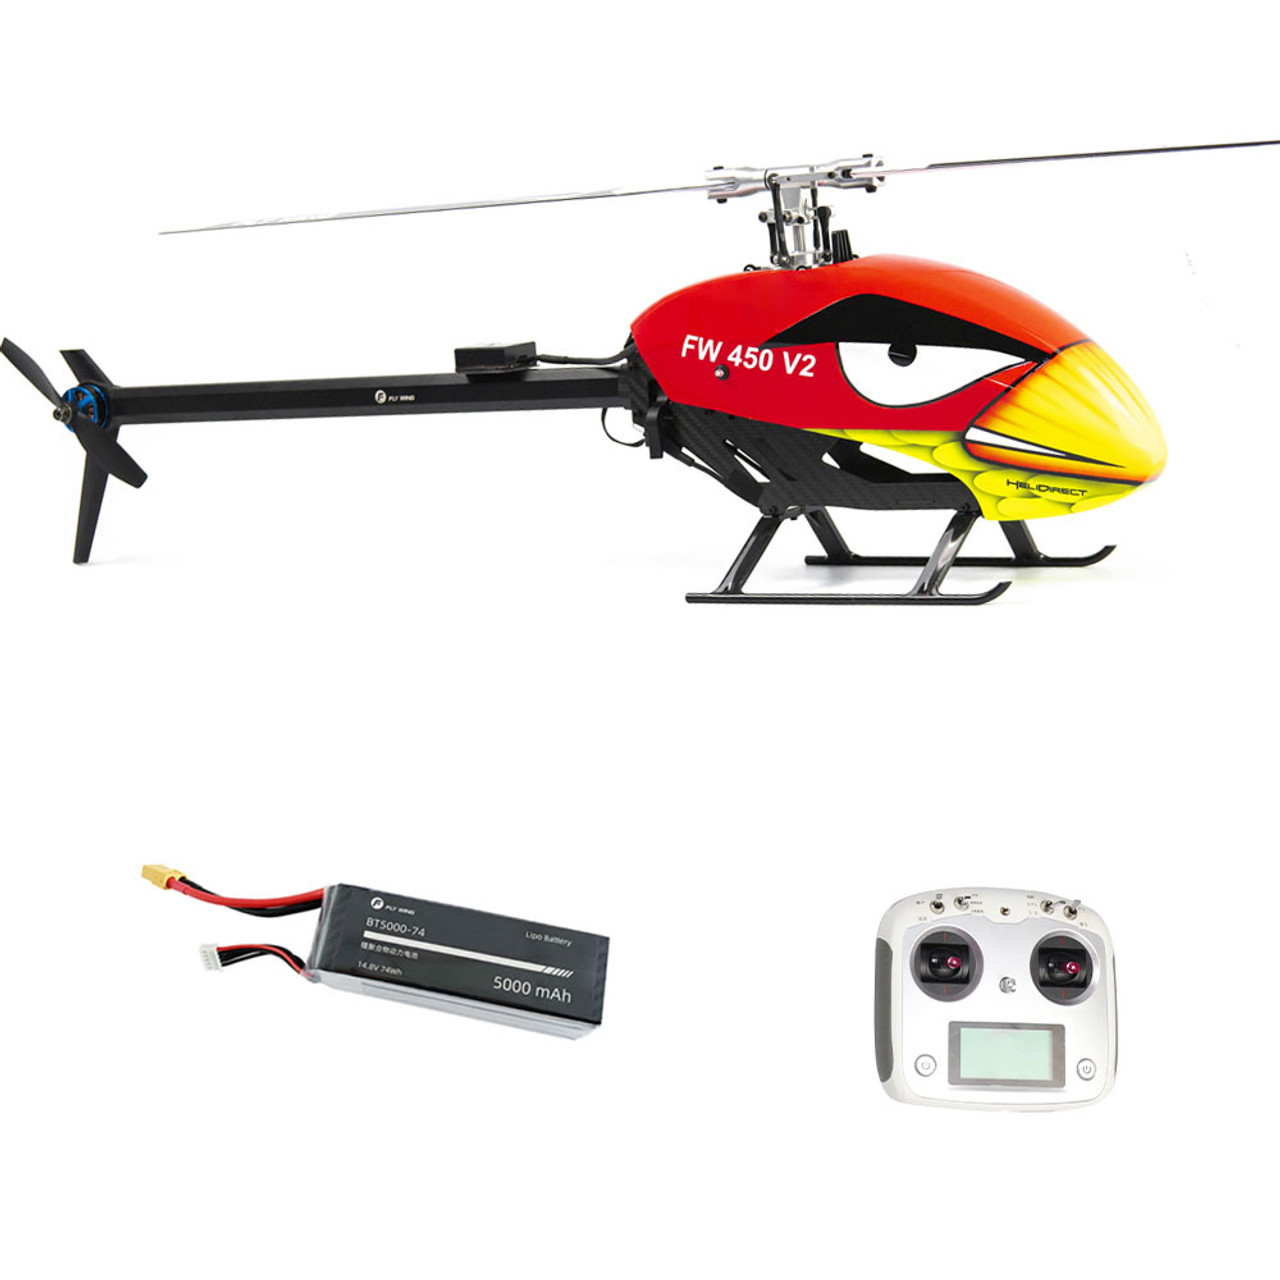 Tot Groene achtergrond openbaar FLY WING FW450L V2.5 6CH FBL 3D Flying GPS Altitude Hold One-key Return RC  Helicopter RTF